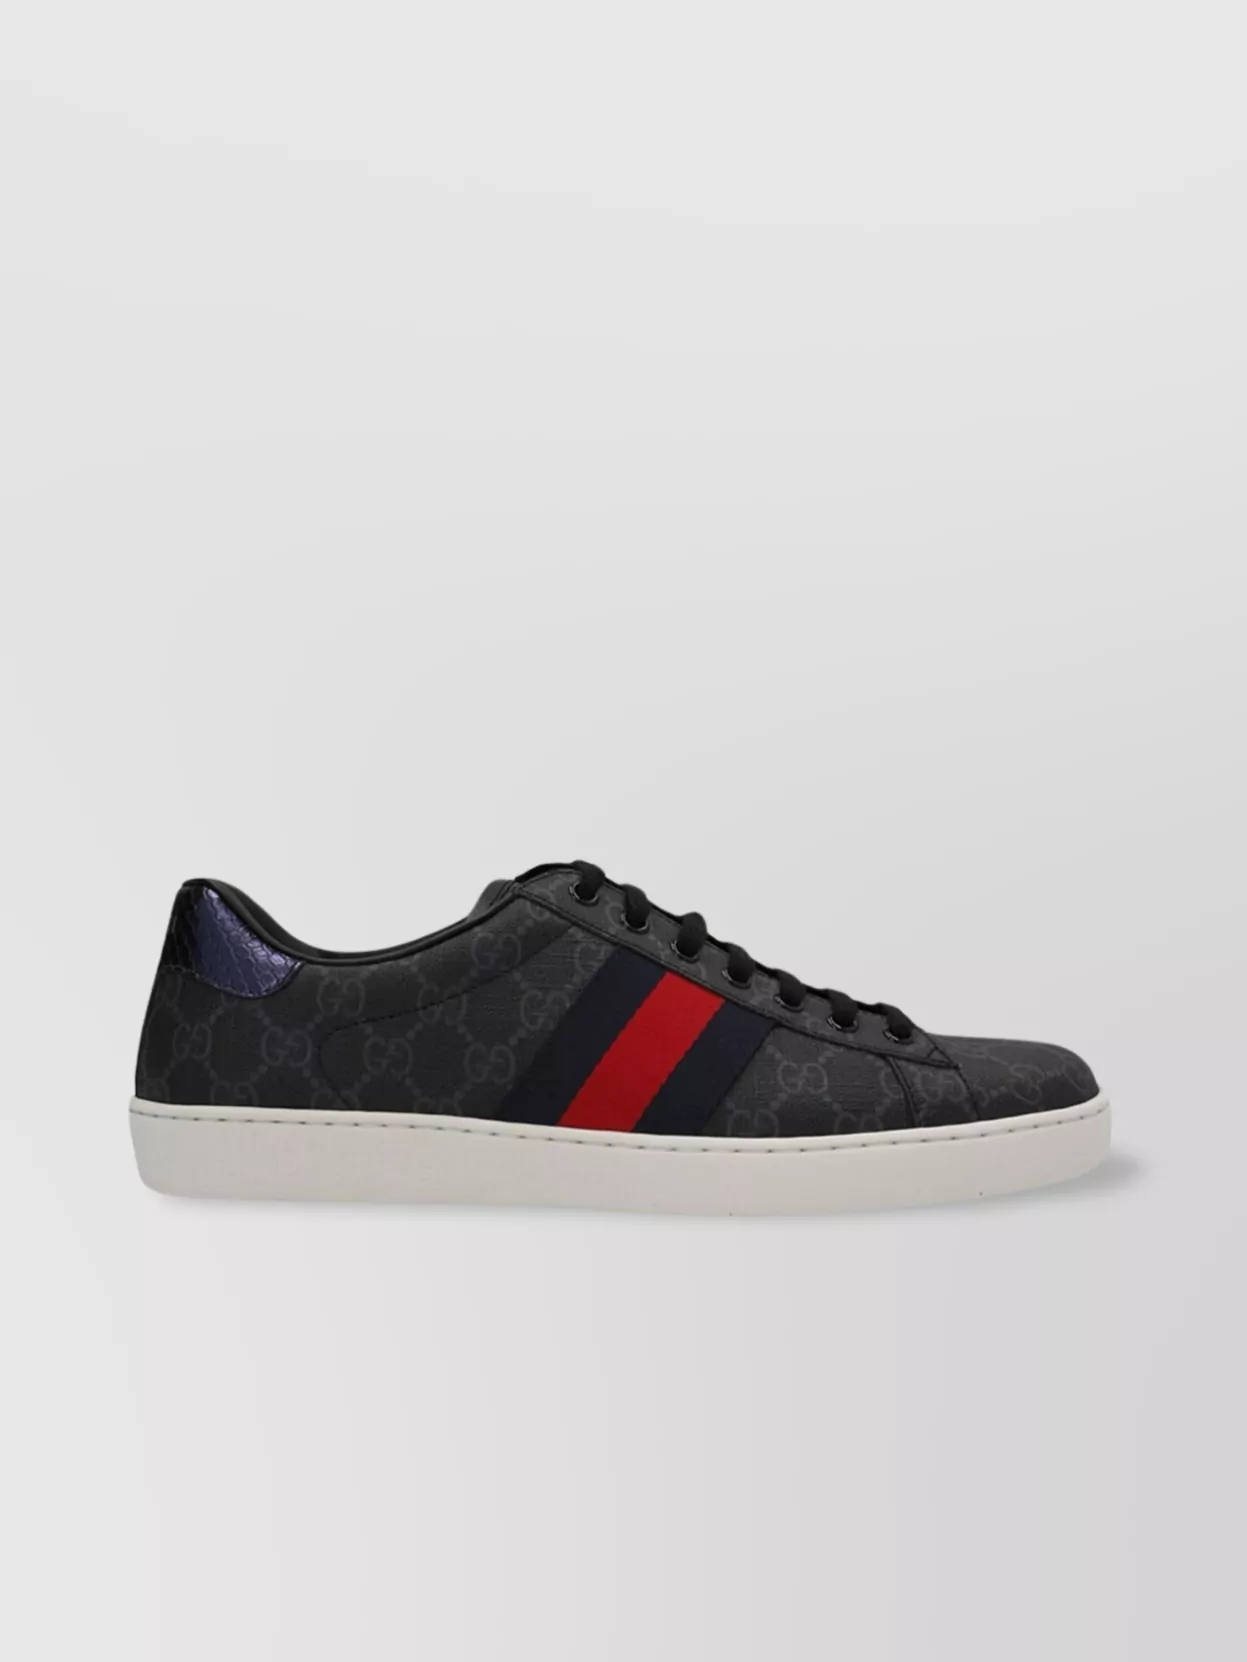 Gucci Low-top Sneakers With Striped Round Toe In Black